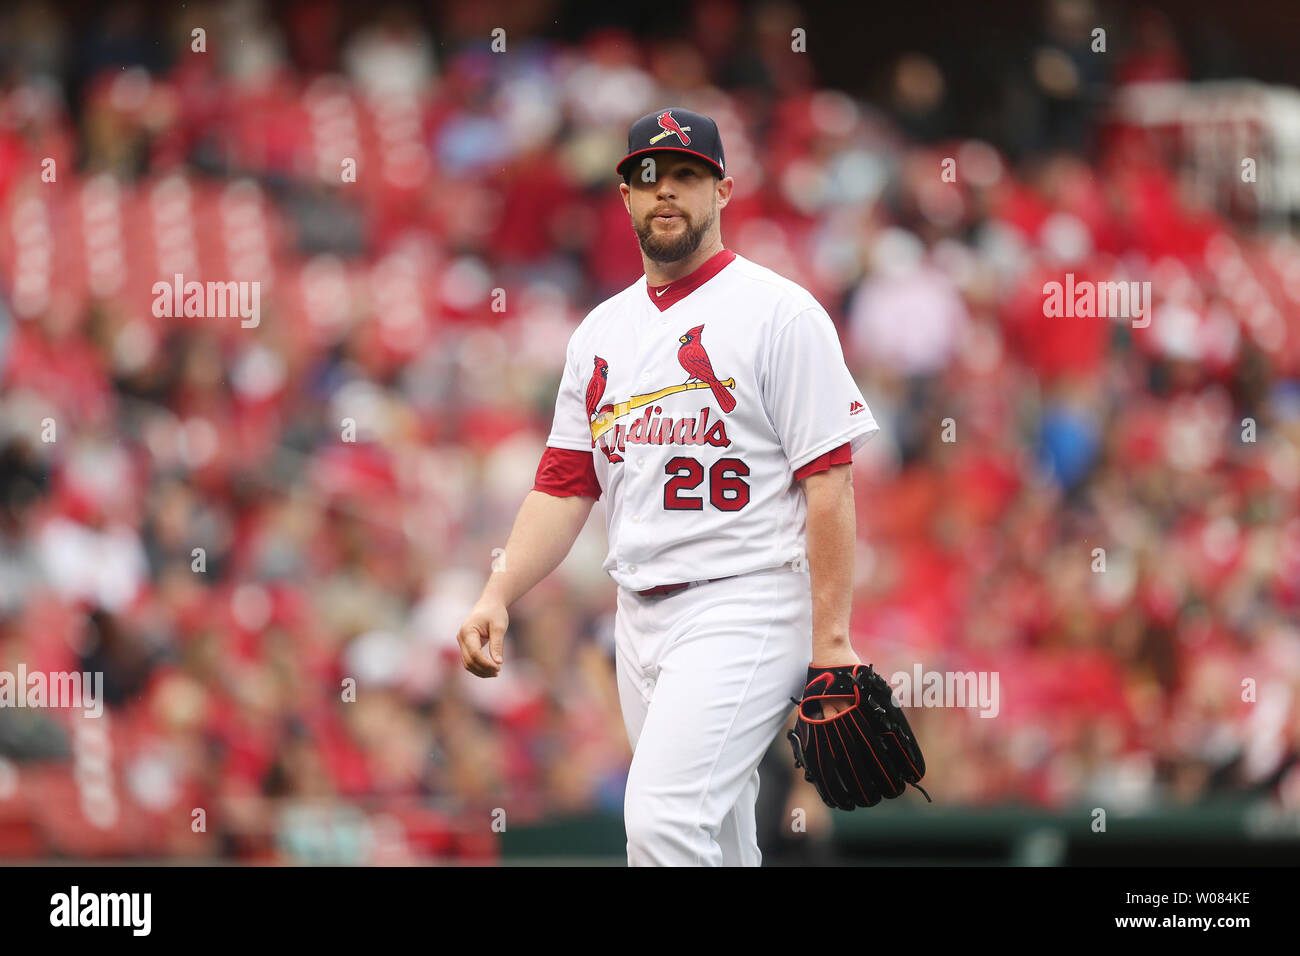 St. Louis Cardinals pitcher Bud Norris leaves the field after working the eighth inning against the Cincinnati Reds at Busch Stadium in St. Louis on April 22, 2018. St. Louis defeated Cincinnati 9-2.  Photo by Bill Greenblatt/UPI Stock Photo